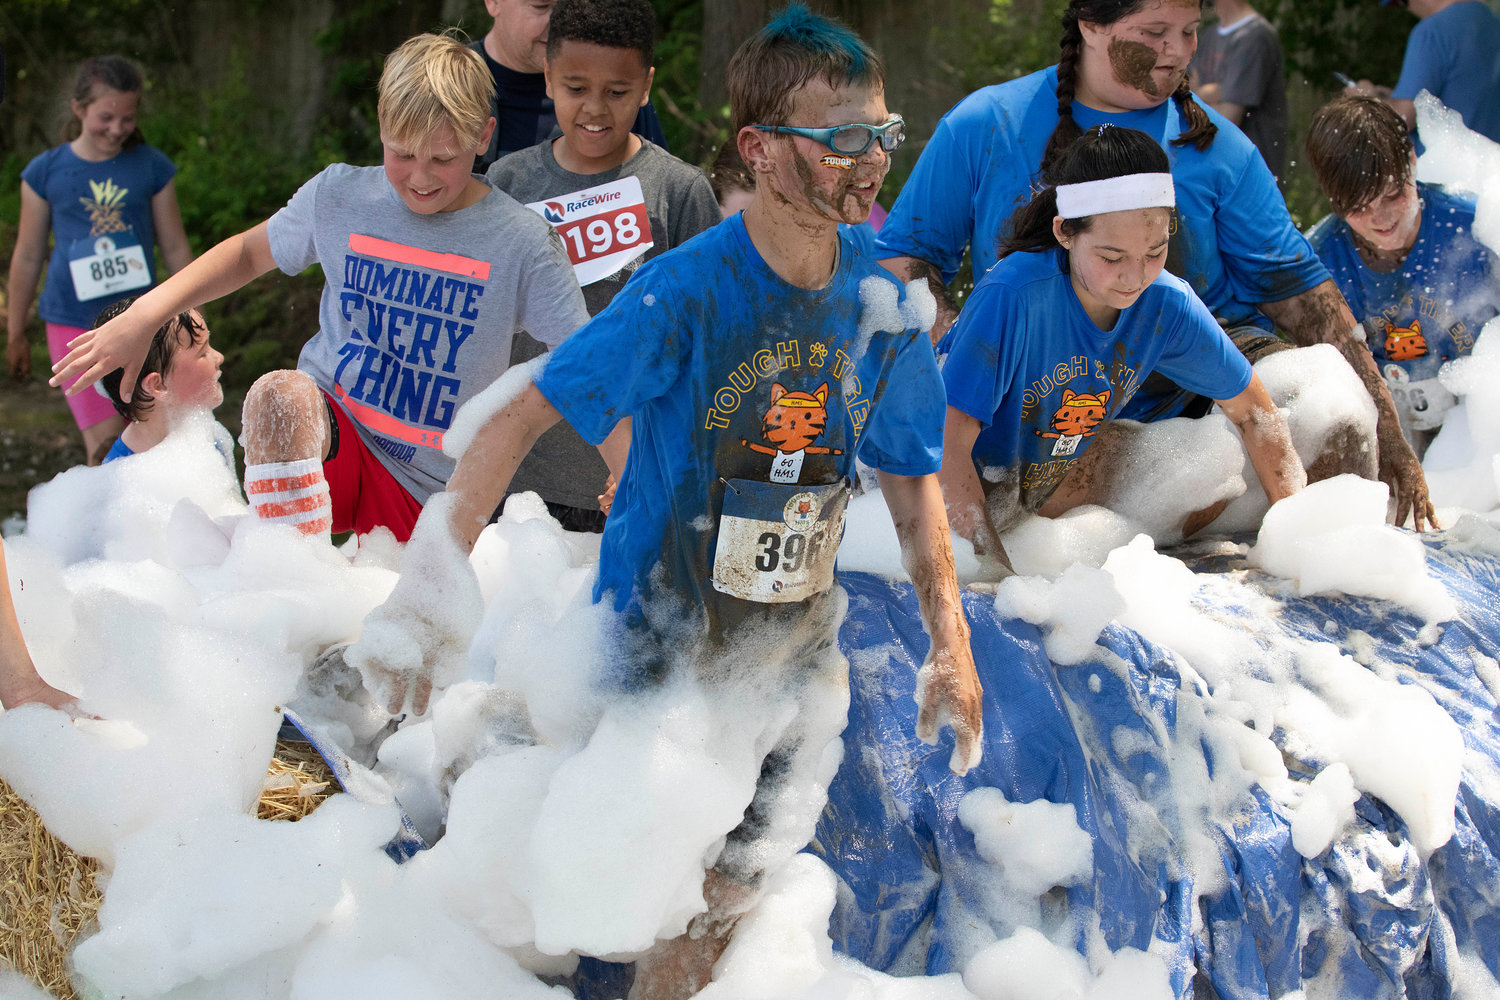 Jackson Gill (middle) leads a group of competitors through the “carwash” portion of the Tough Tiger adventure race at Hampden Meadows School on Sunday.